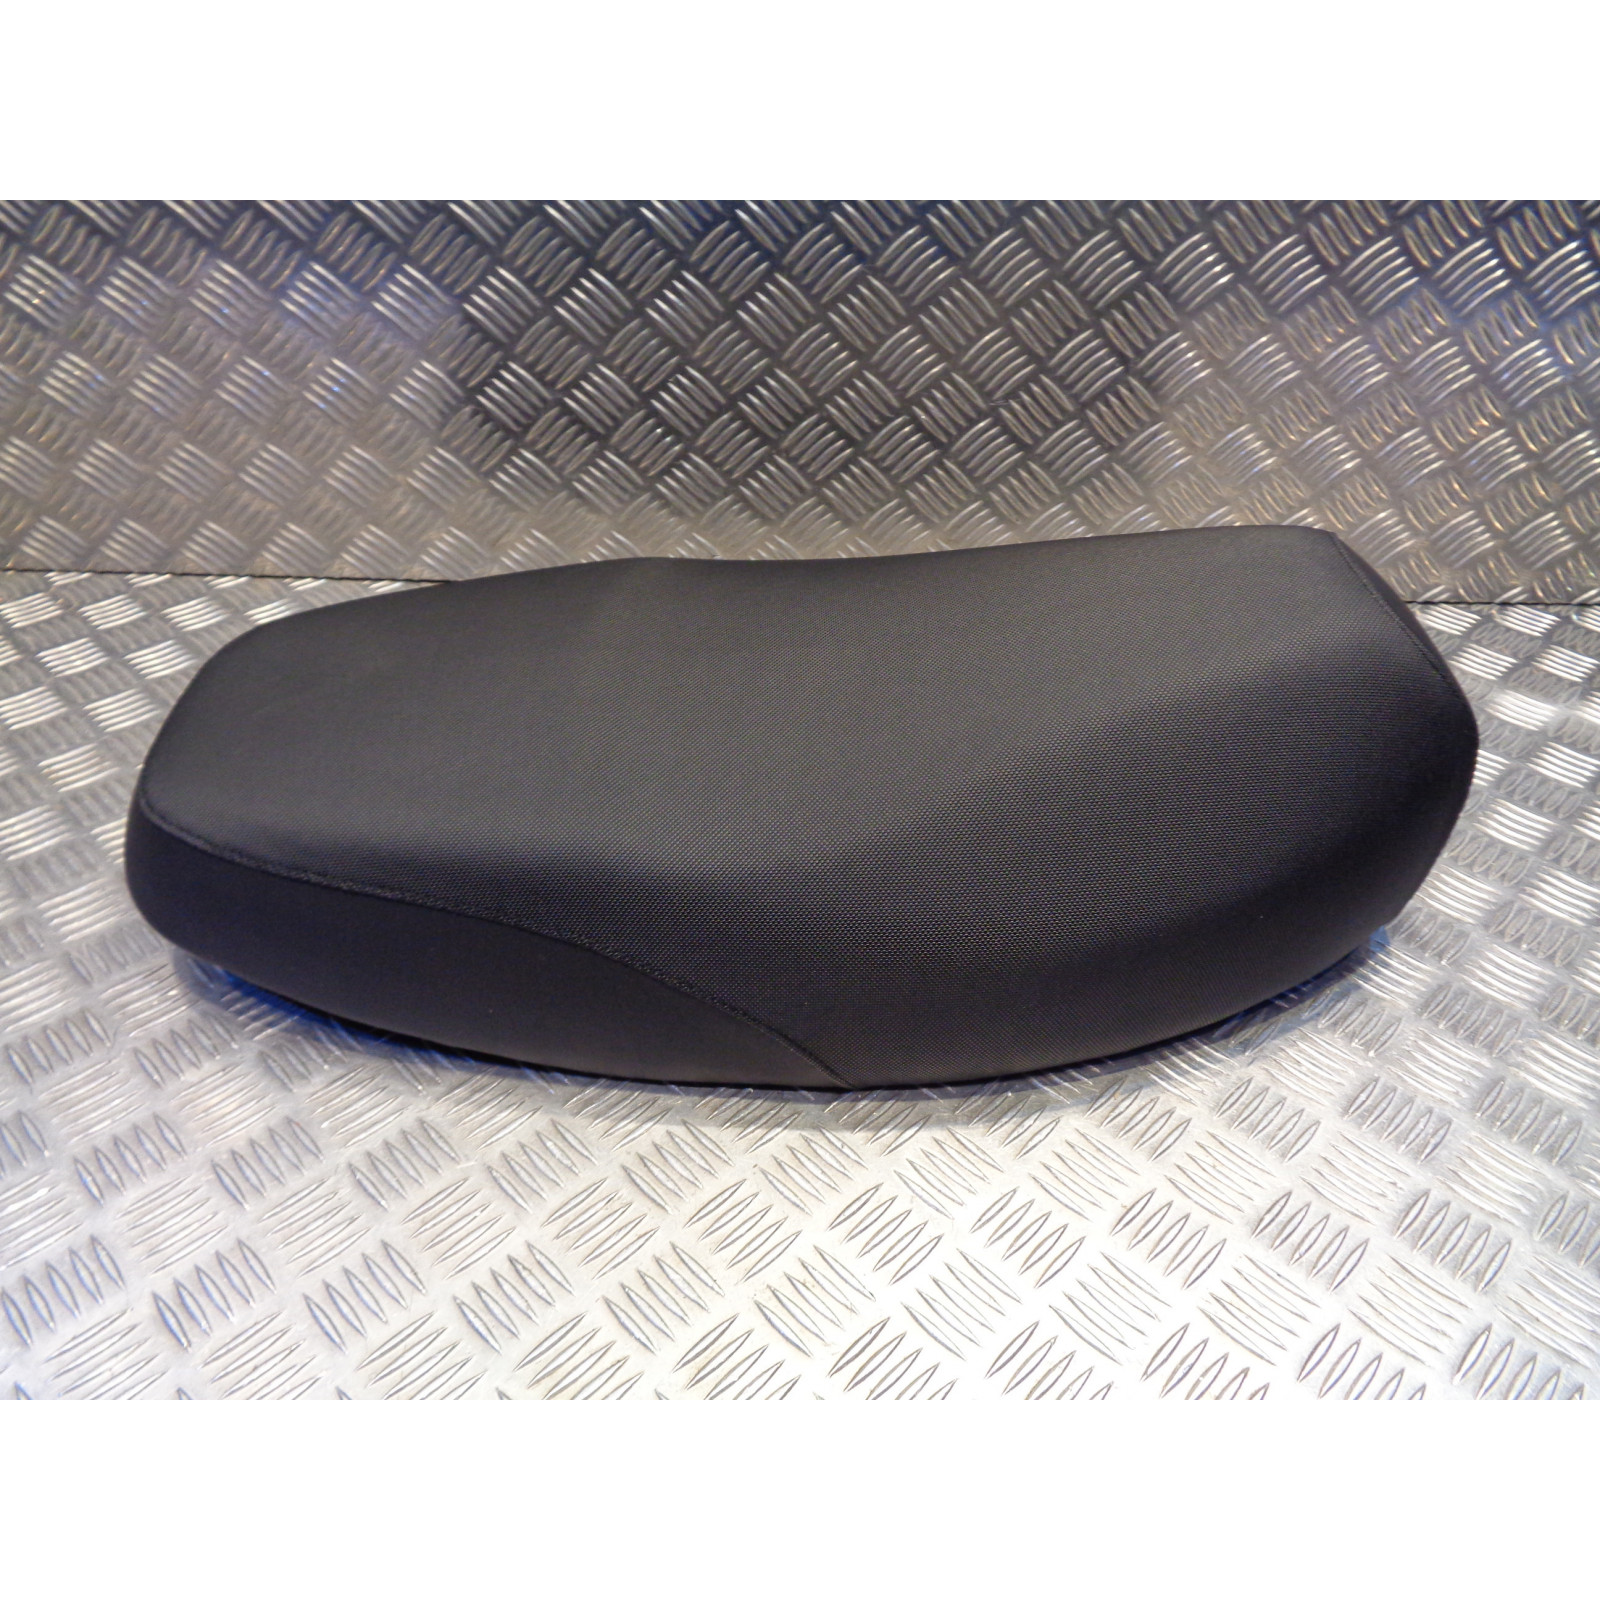 selle noir scooter mbk 50 booster bws apres 2004